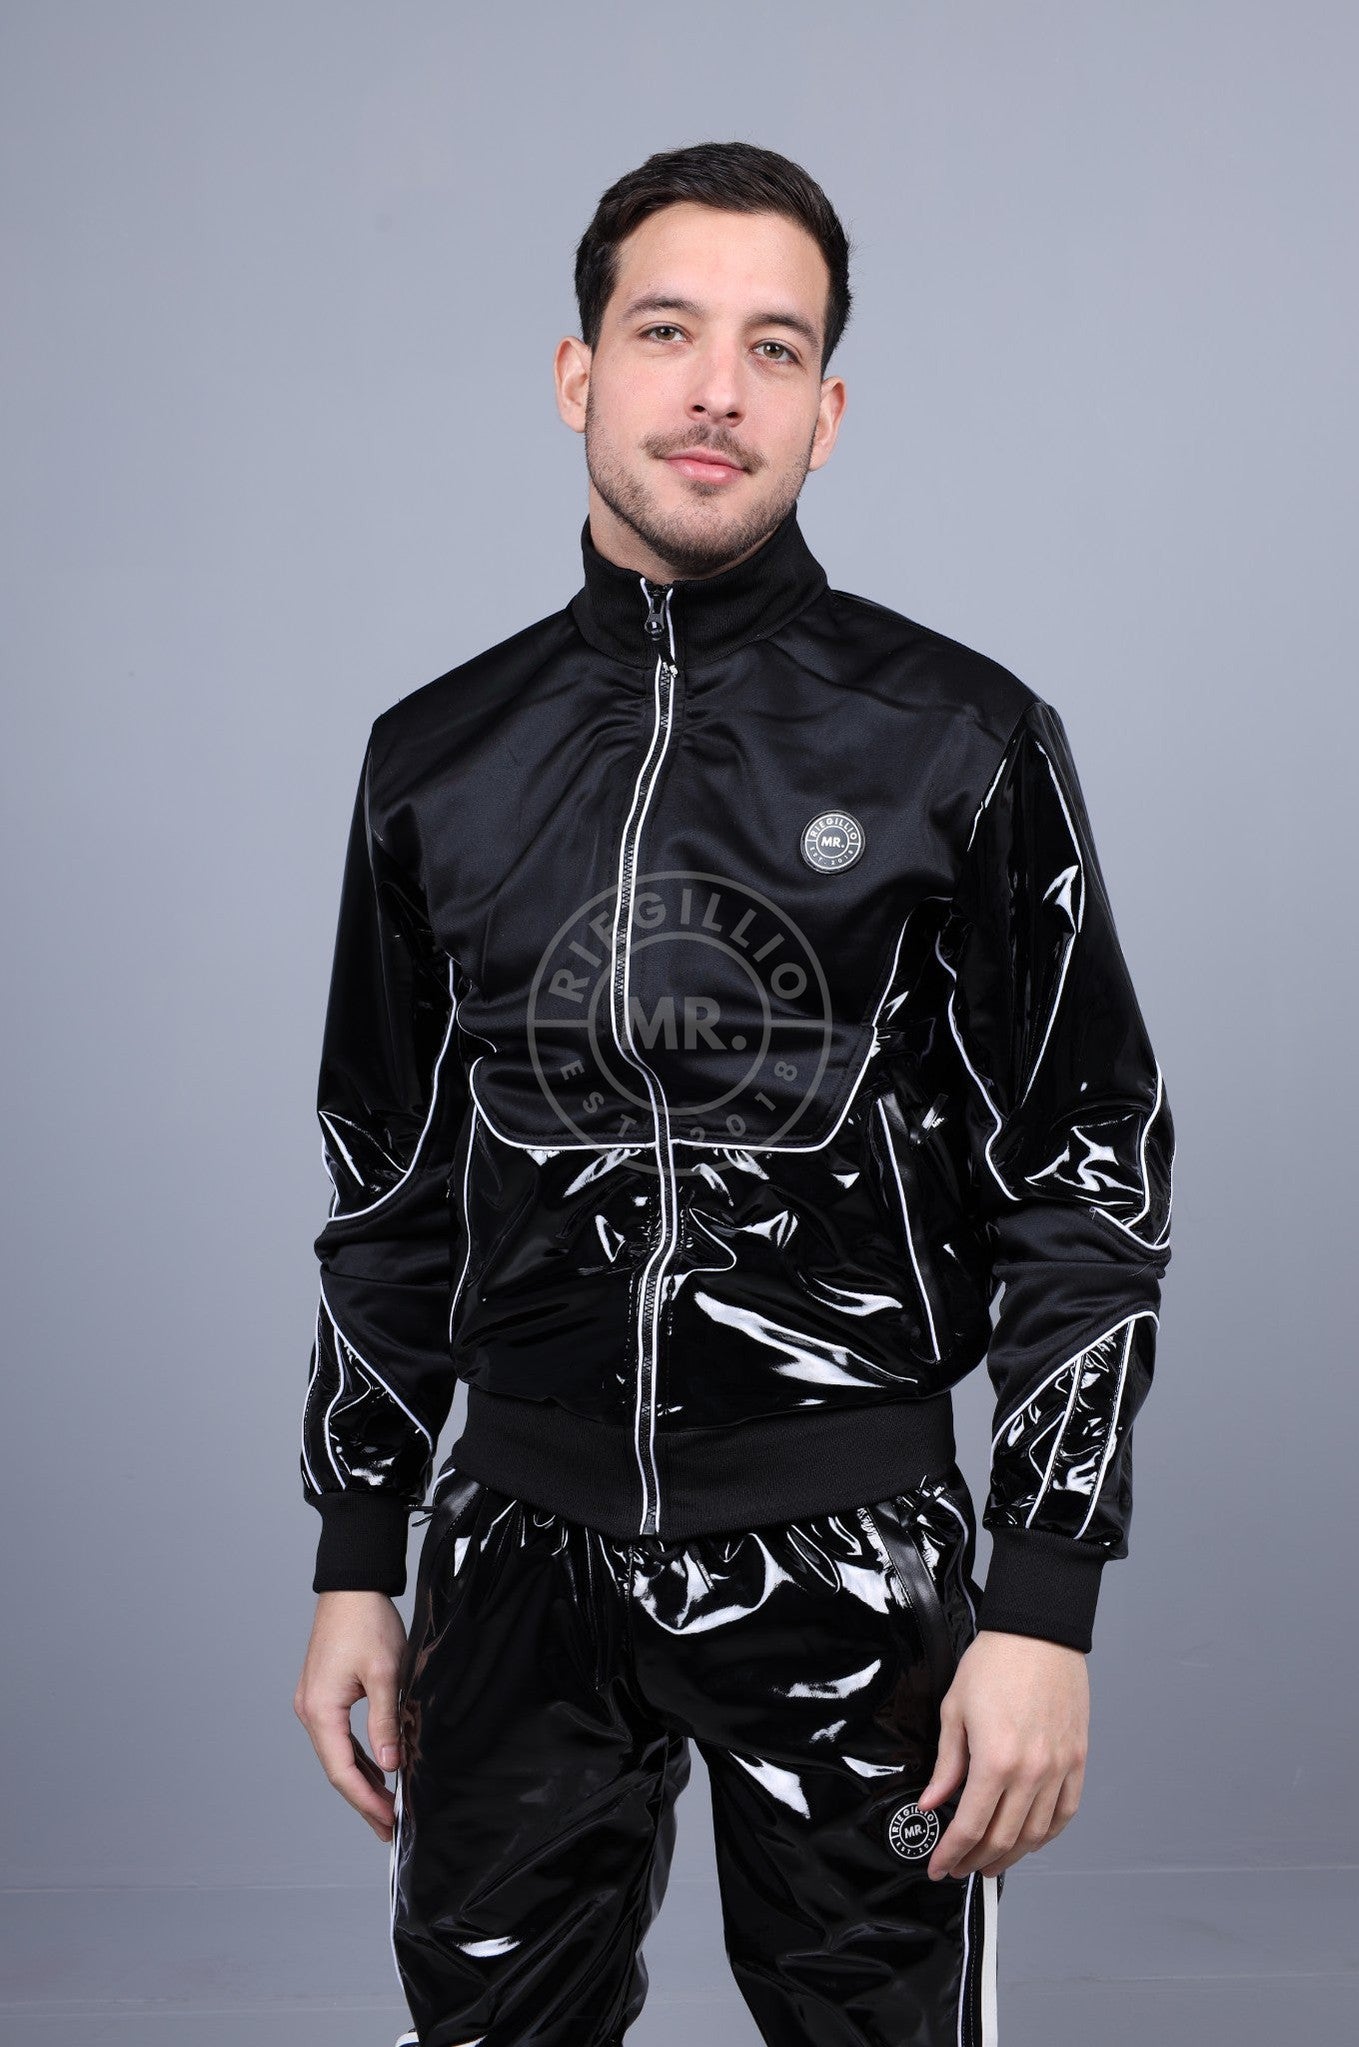 PVC 24 Tracksuit Jacket - Black with White Piping-at MR. Riegillio